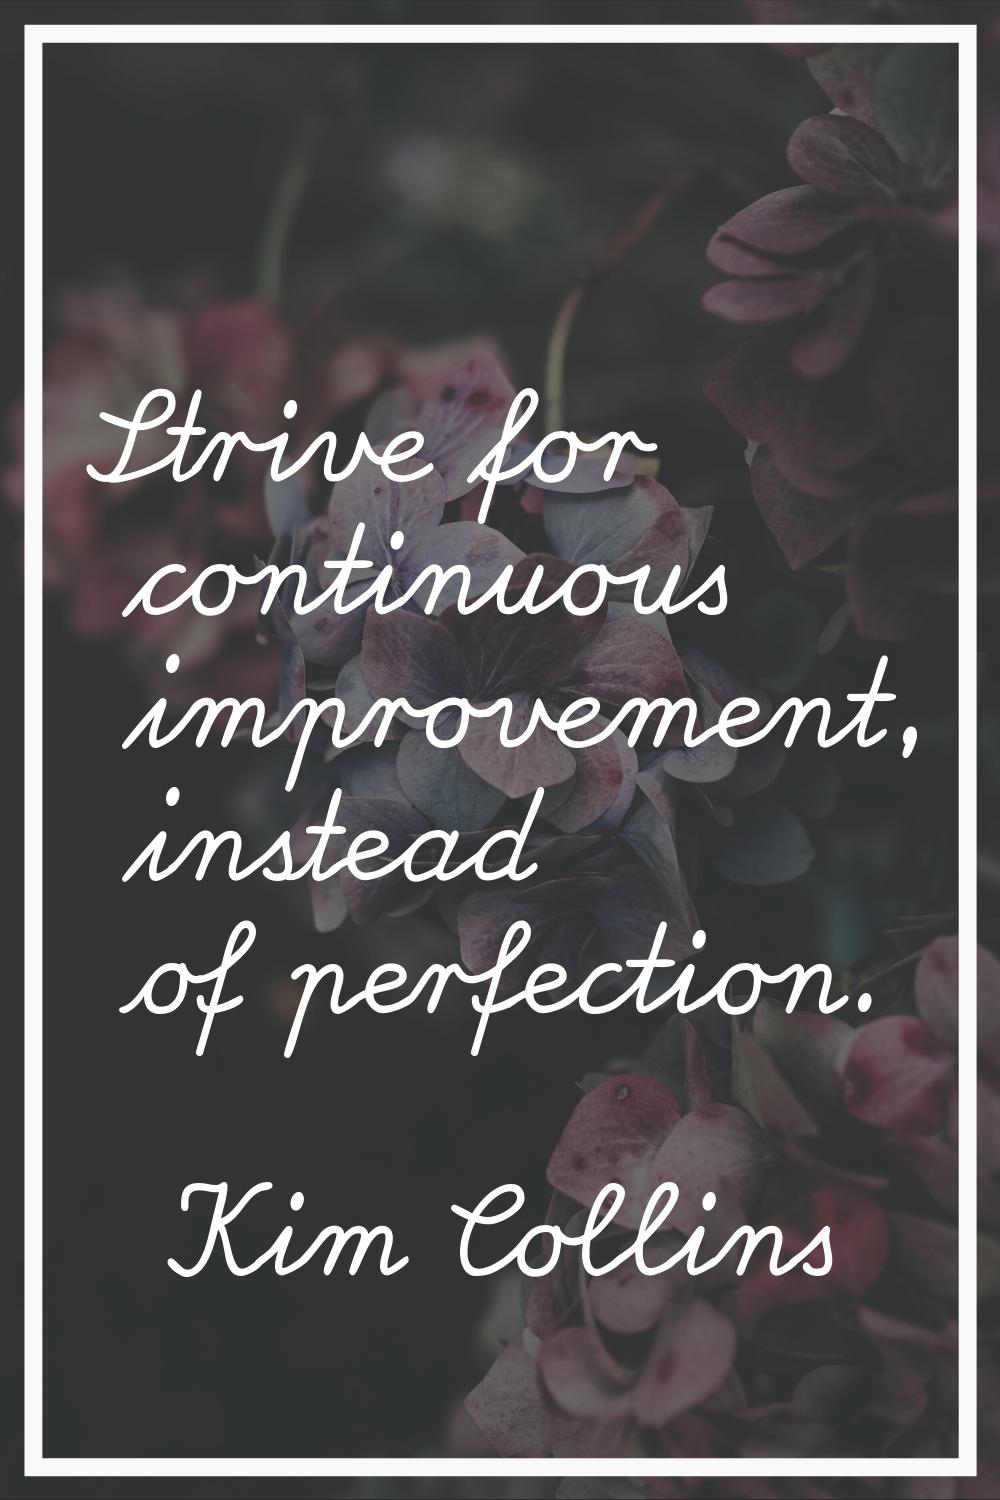 Strive for continuous improvement, instead of perfection.